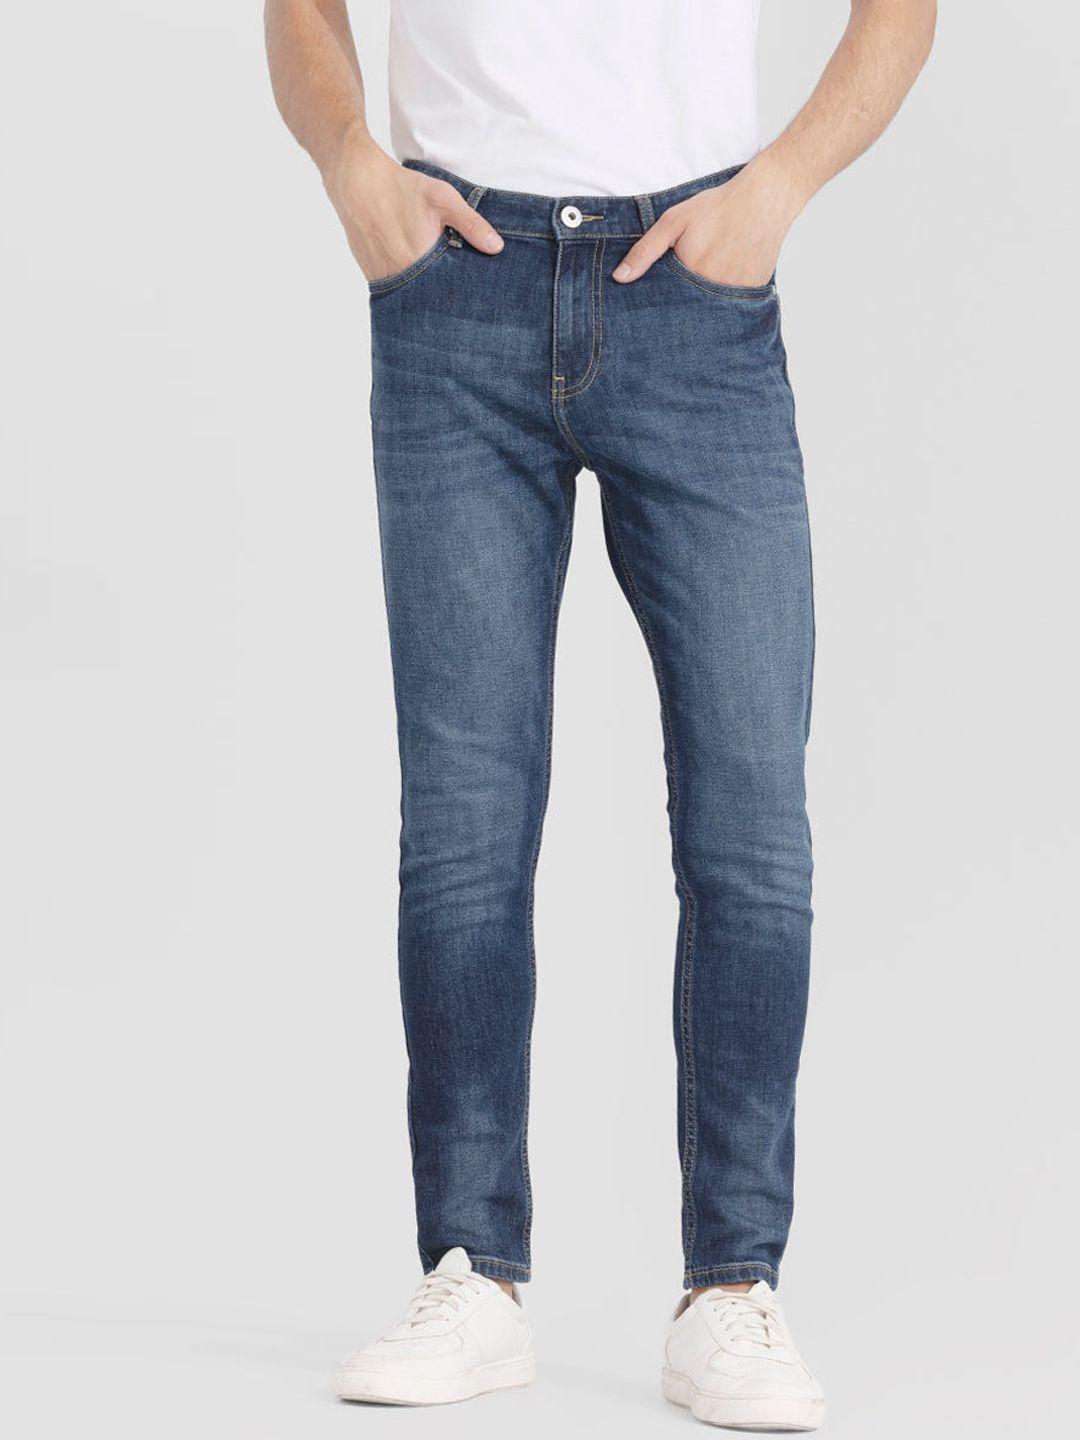 snitch-men-blue-classic-skinny-fit-light-fade-stretchable-jeans